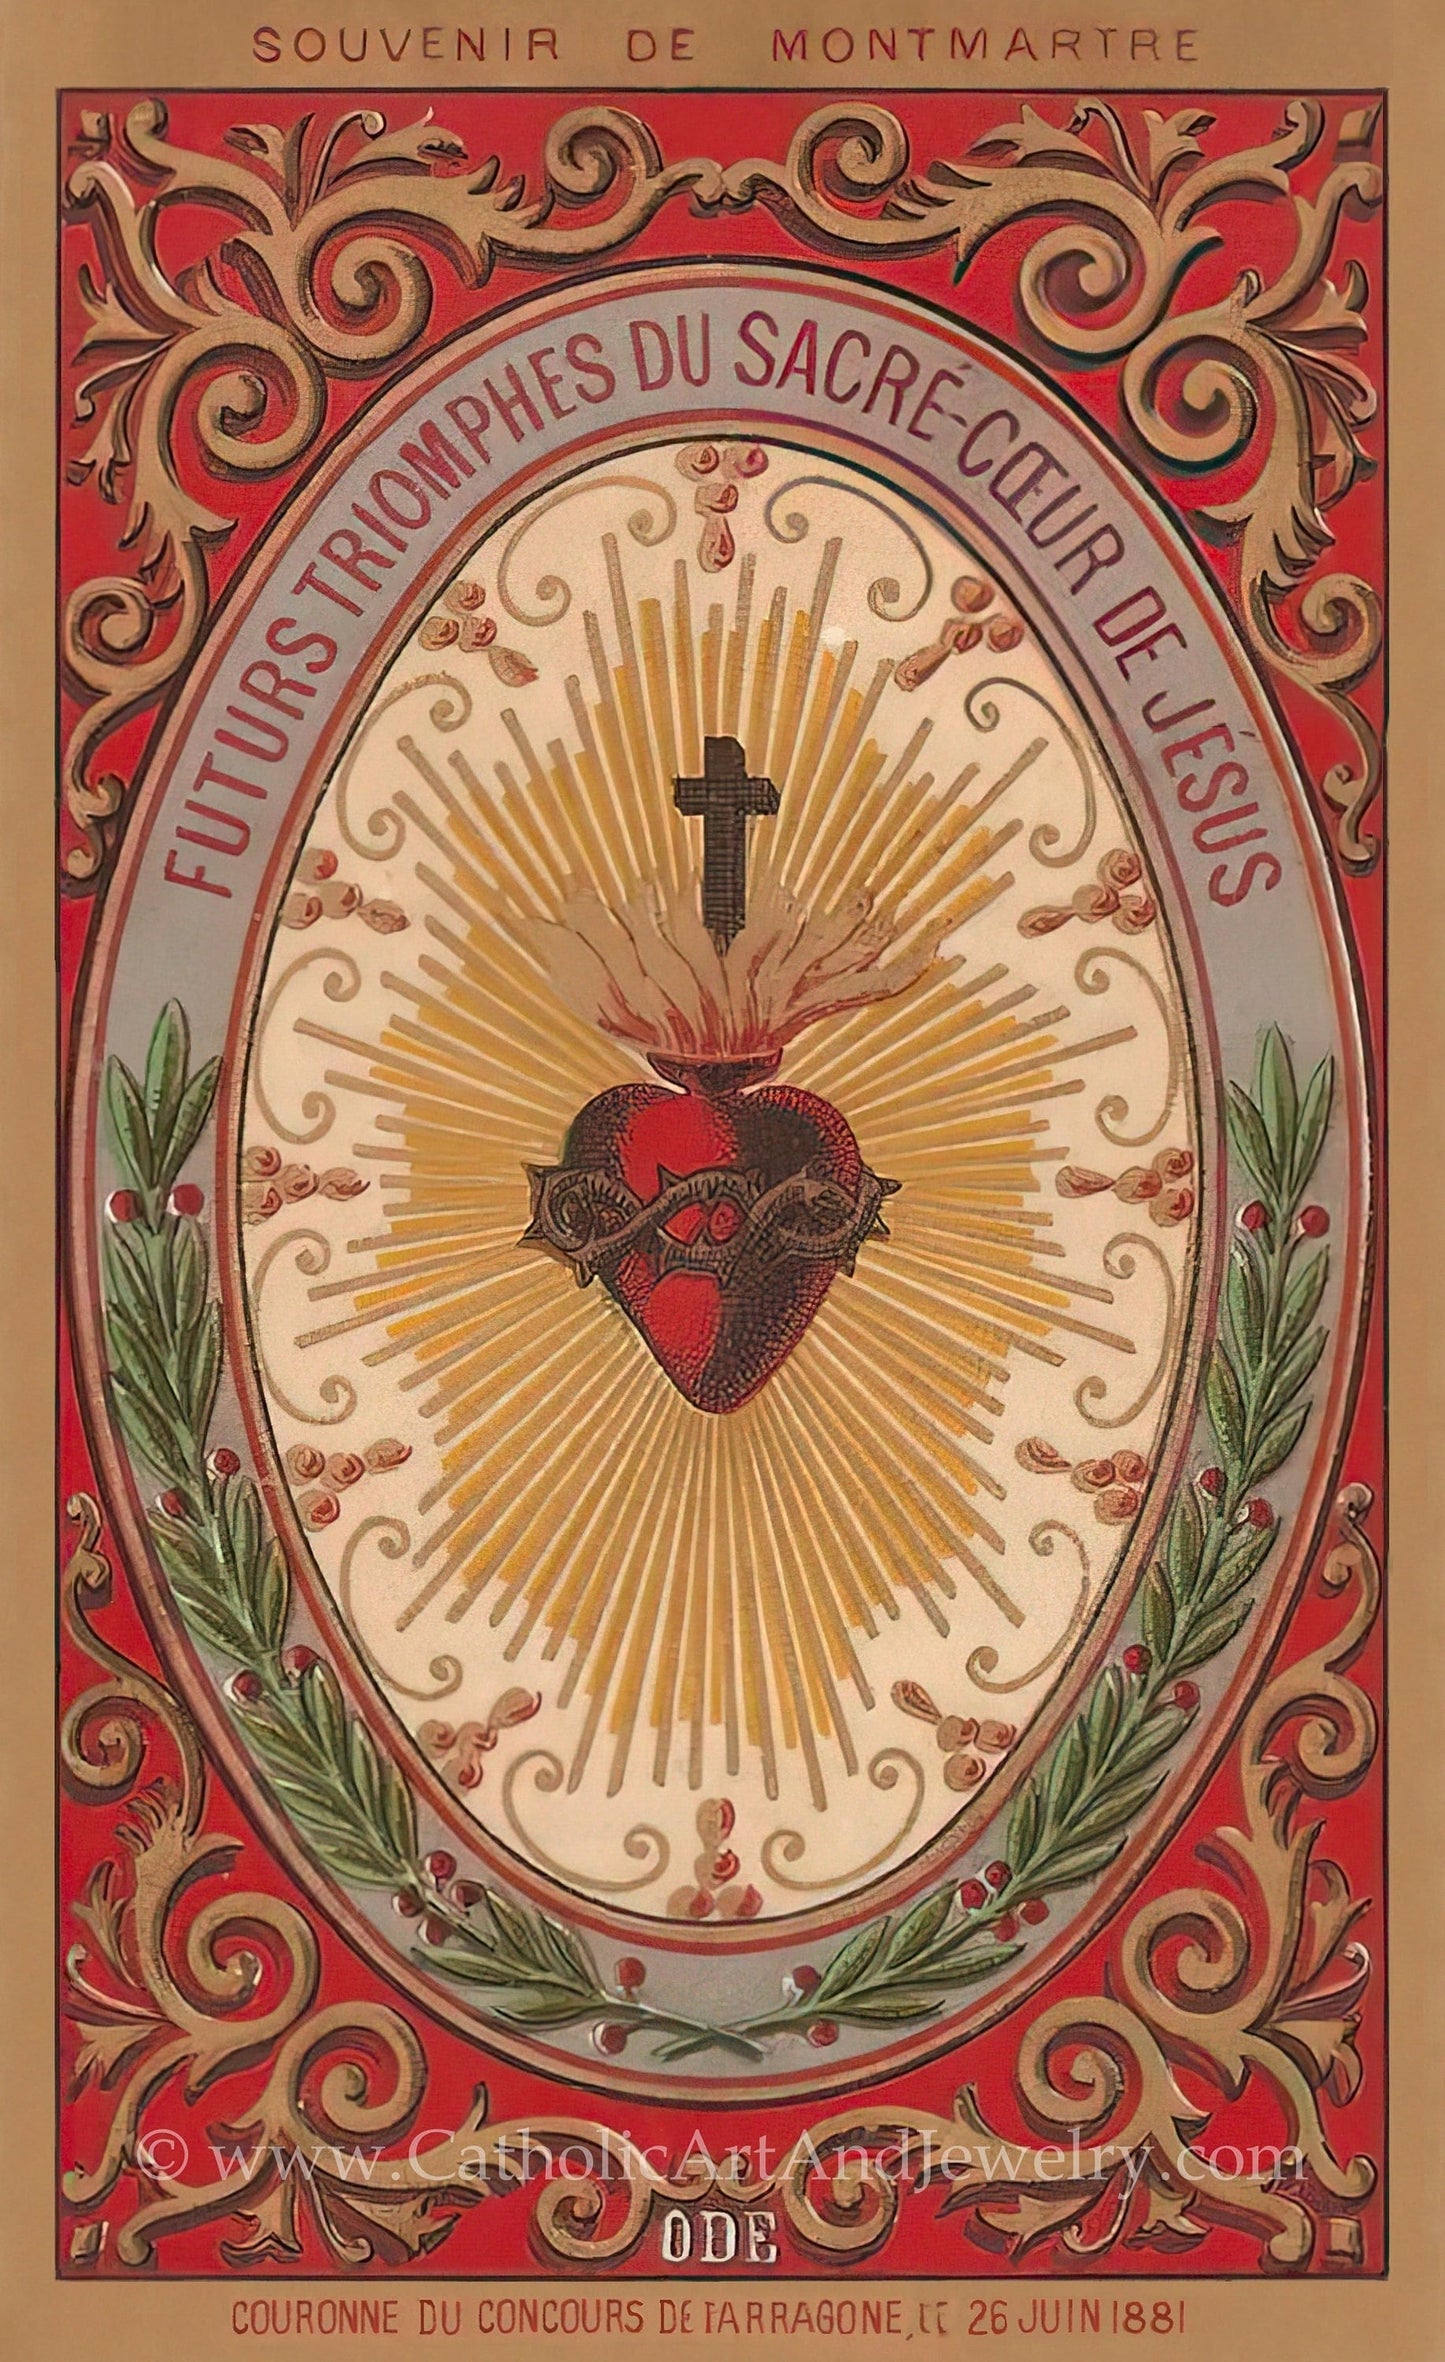 New! Future Triumphs of the Sacred Heart – based on a Vintage French Holy Card – Catholic Art Print